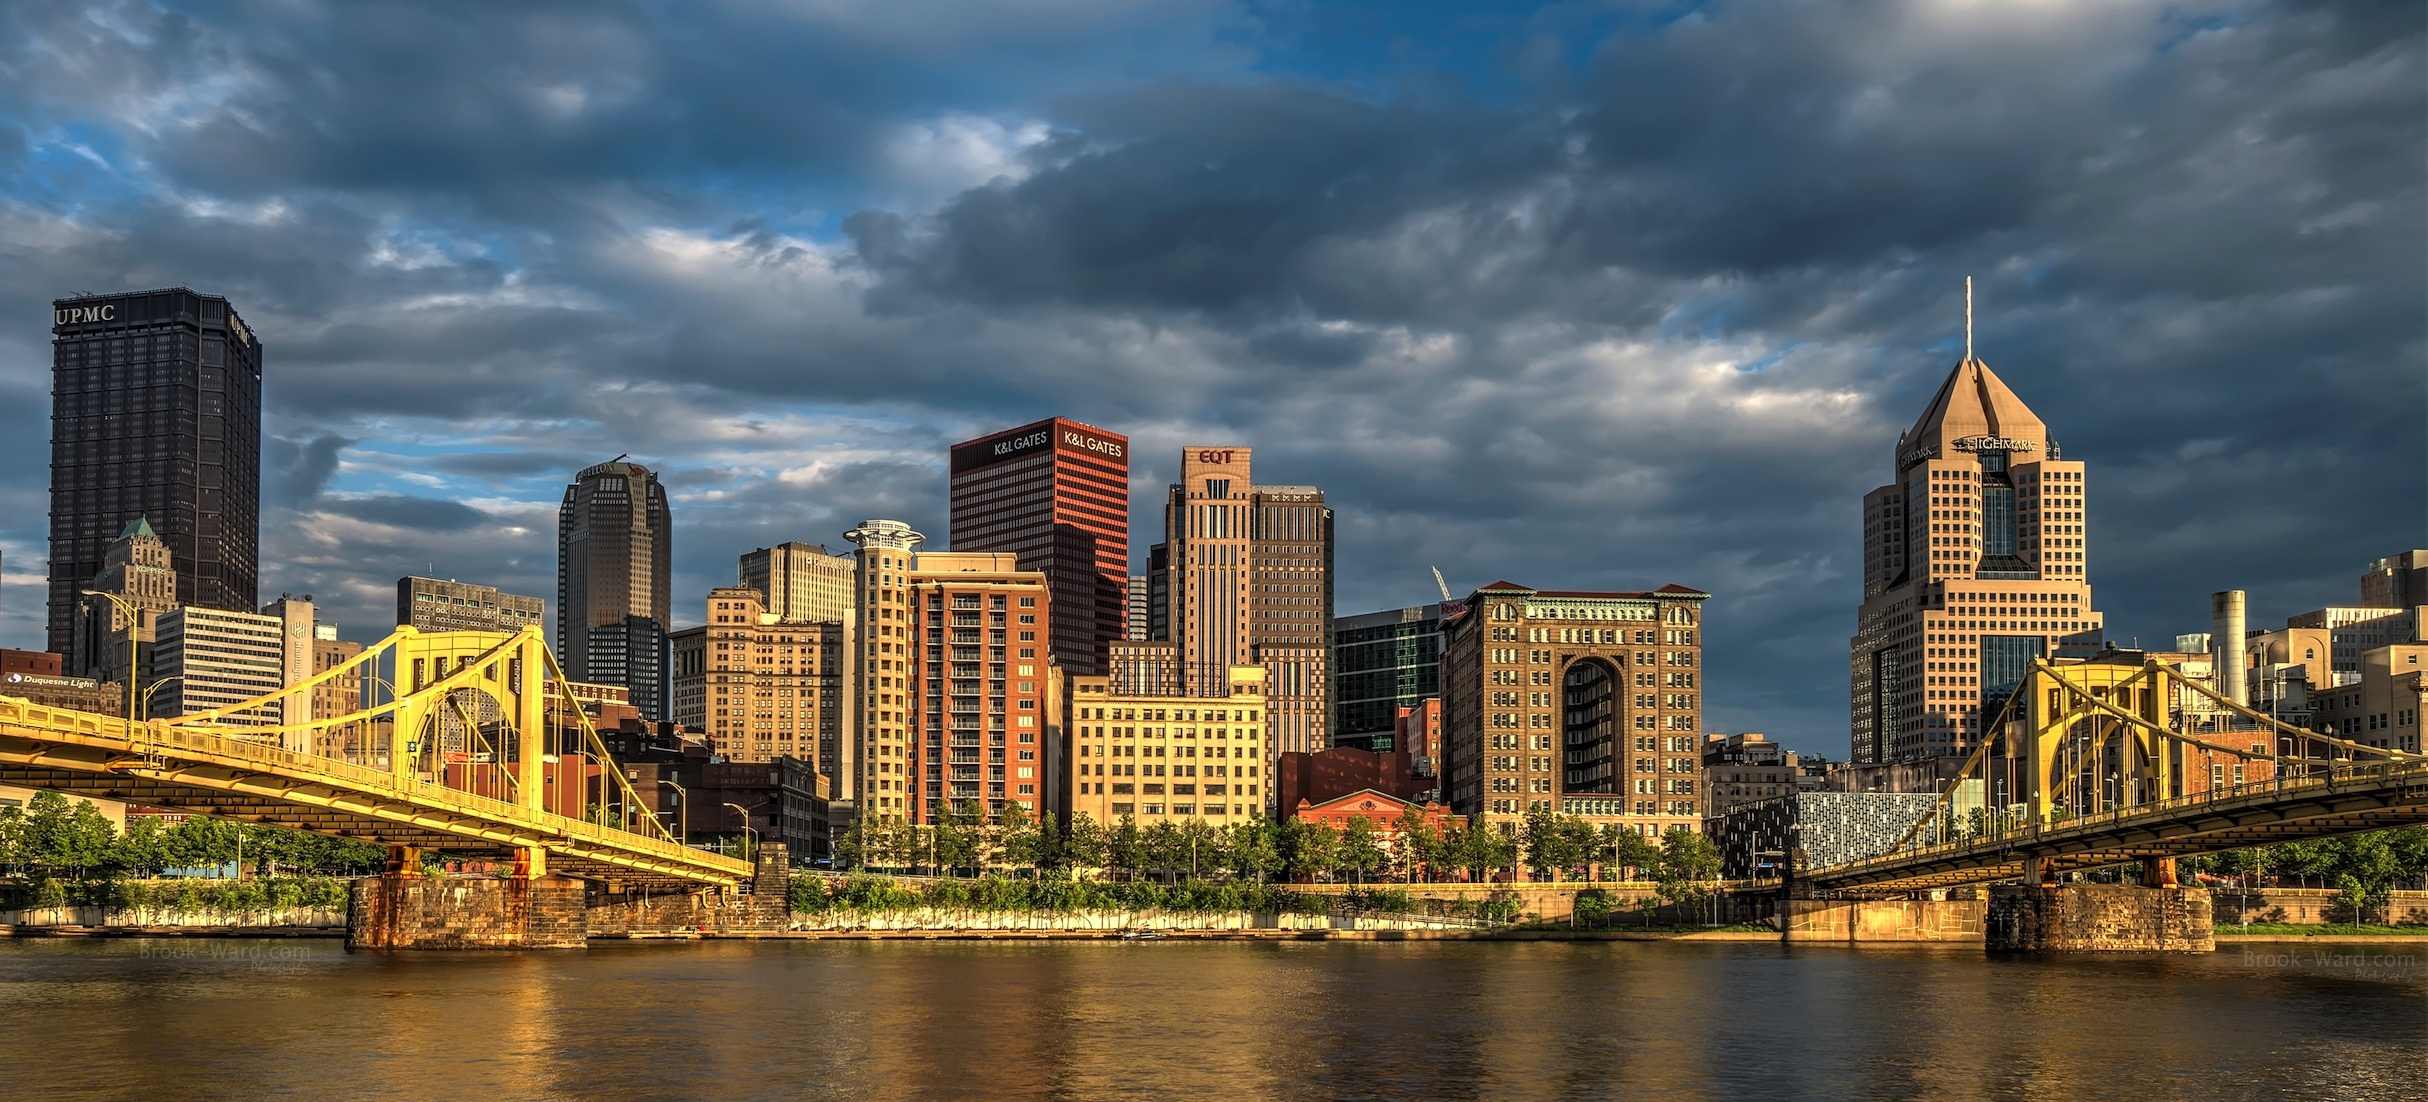 Pretty Pittsburgh, Scenic beauty, Brook Ward photography, Captivating images, 2430x1110 Dual Screen Desktop